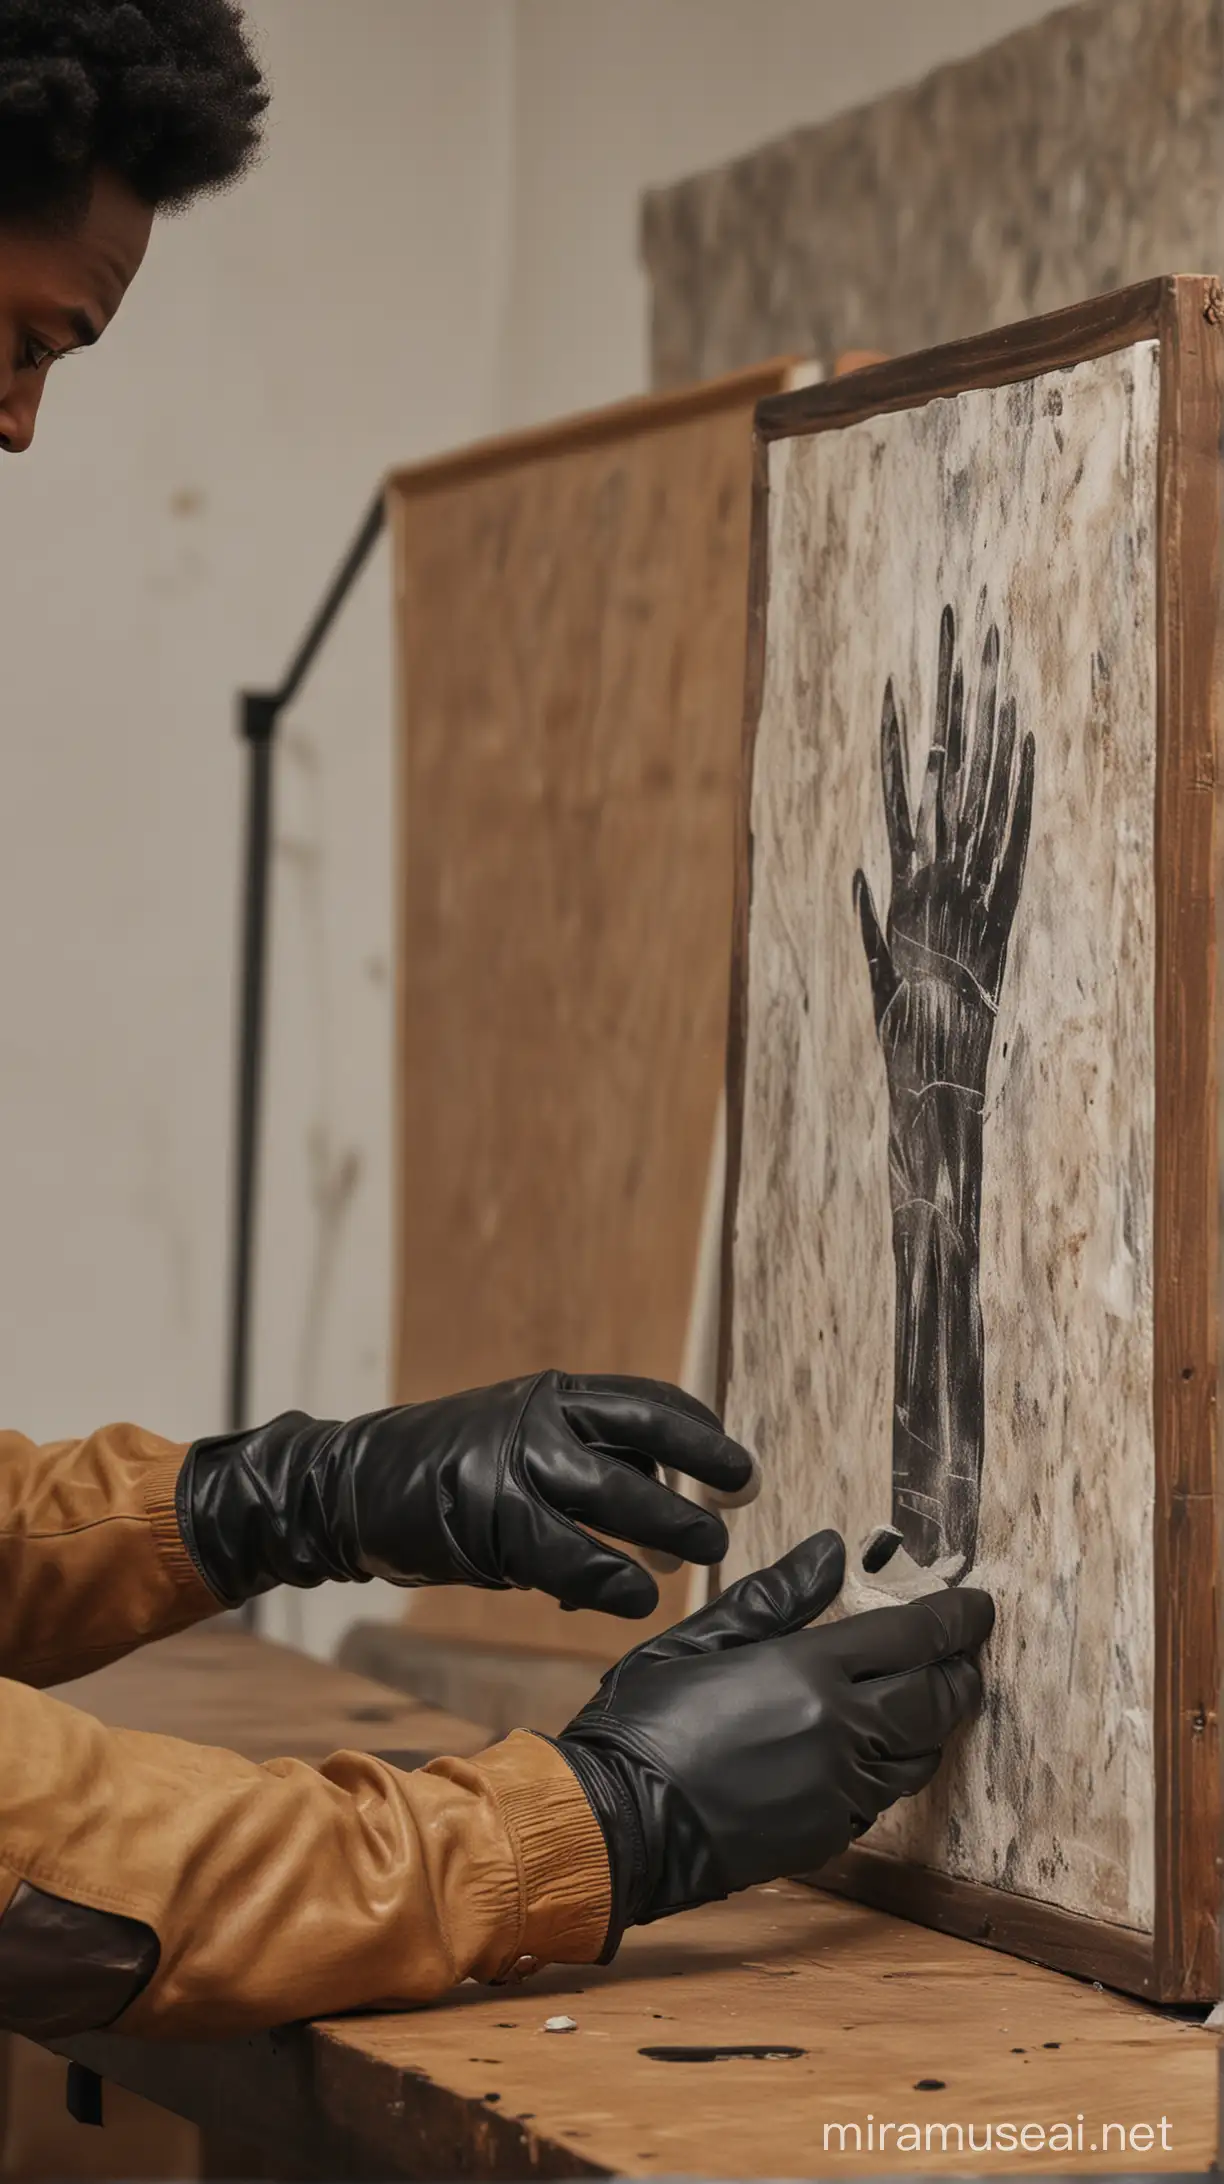 Closeup of Black Artist in Gloves Lifting Artwork from Table